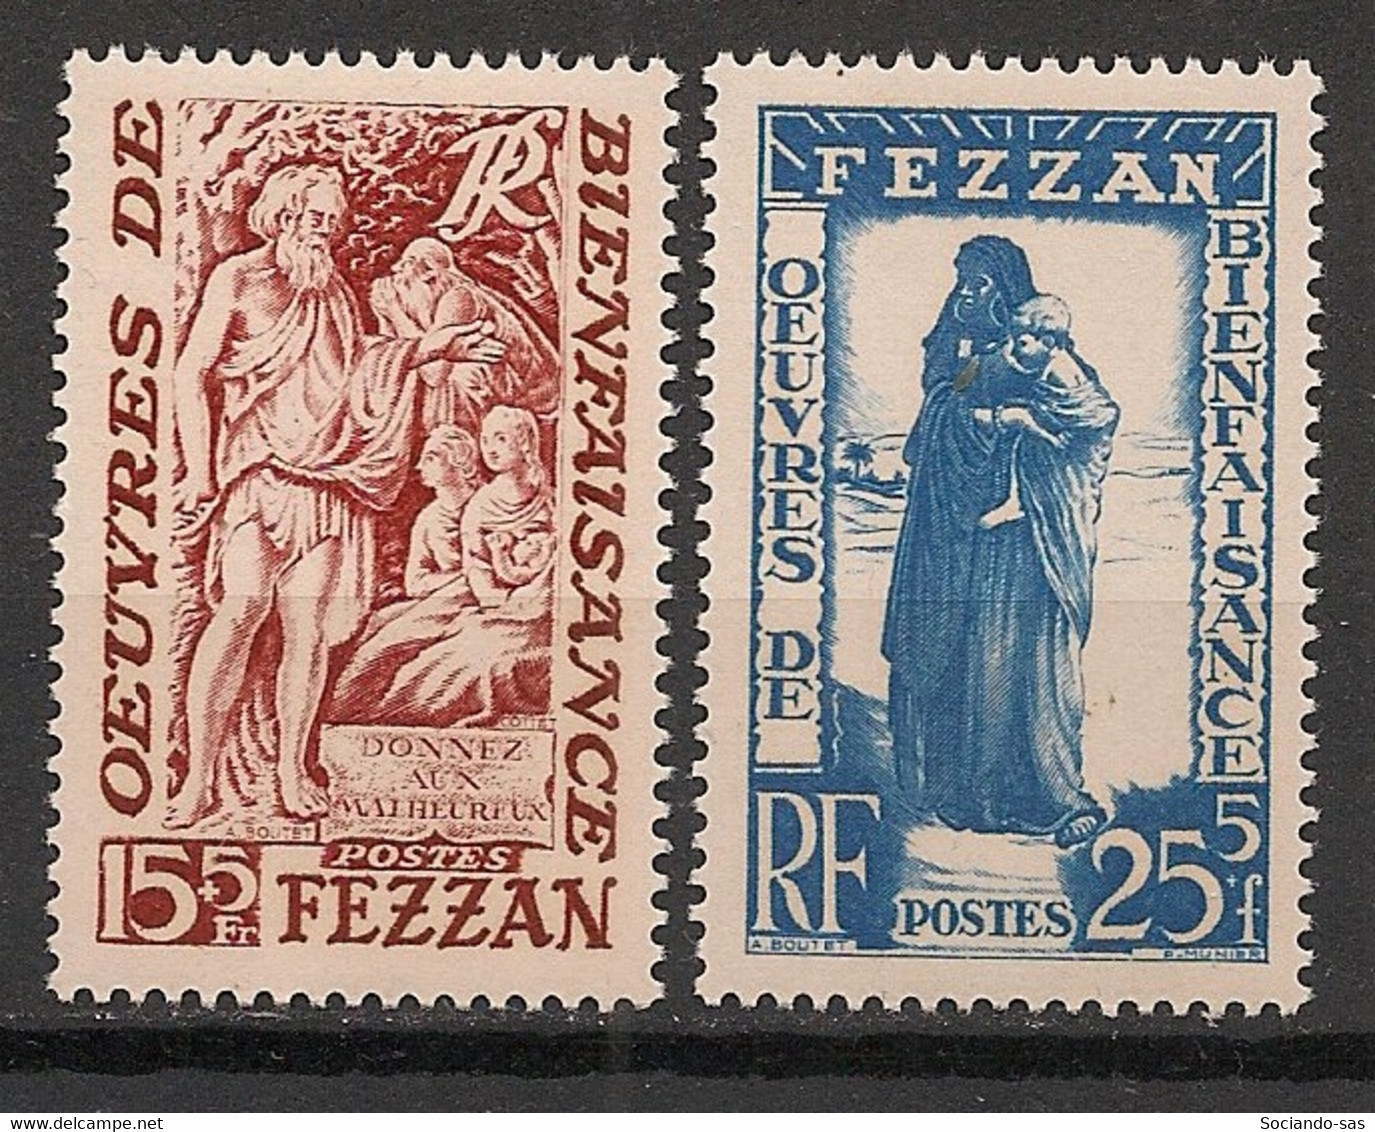 FEZZAN - 1950 - N°Yv. 54 à 55 - Série Complète - Neuf Luxe ** / MNH / Postfrisch - Unused Stamps